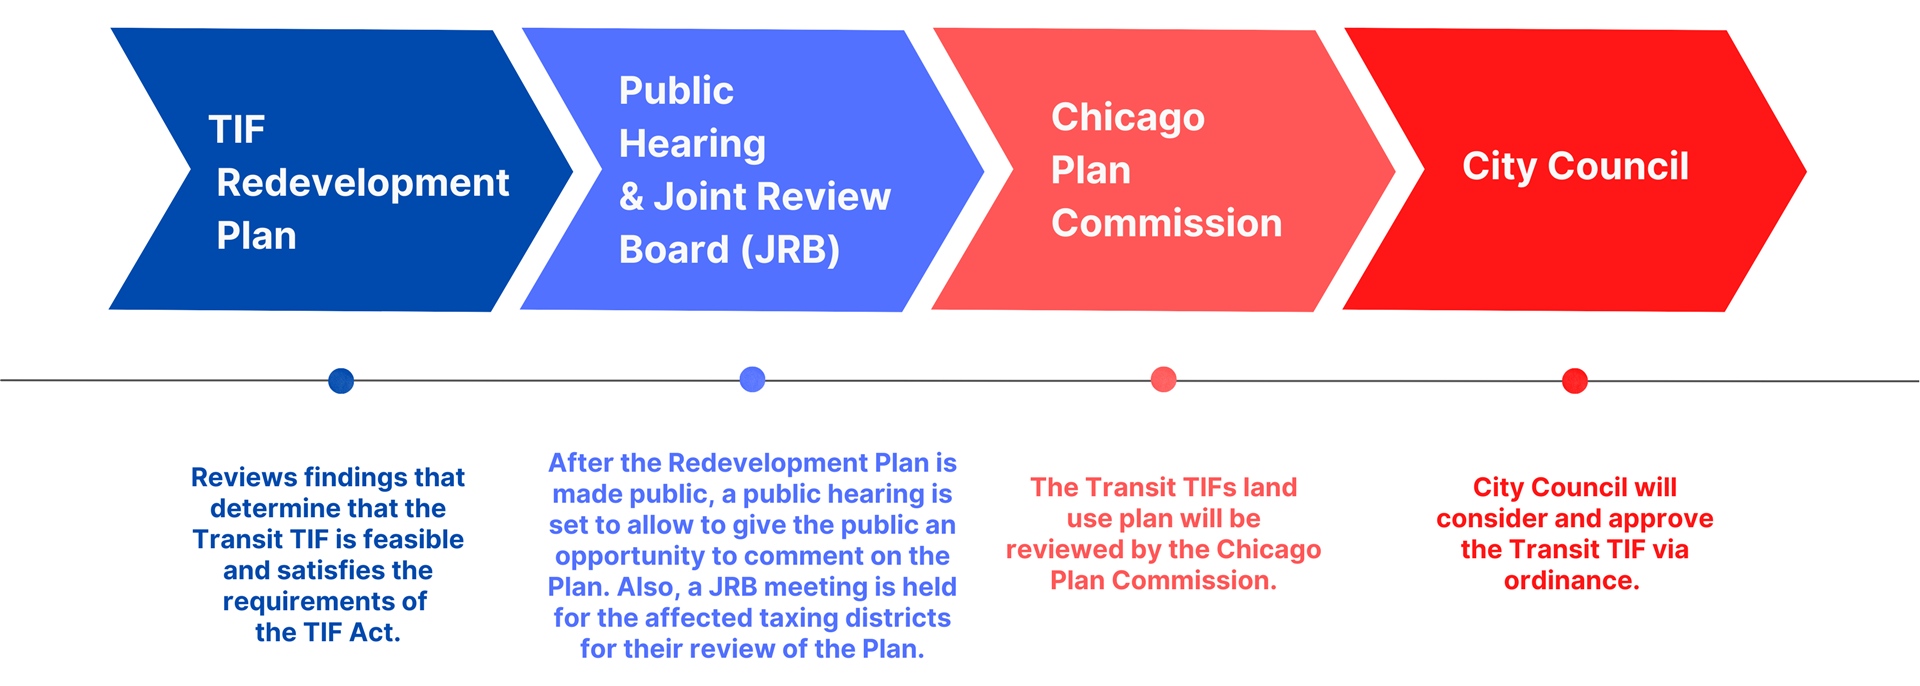 RLE Transit TIF Timeline: Reviews findings that determine that the Transit TIF is feasible and satisfies the requirements of the TIF Act. After the Redevelopment Plan is made public, a public hearing is set to allow to give the public an opportunity to comment on the Plan. Also, a JRB meeting is held for the affected taxing districts for their review of the Plan. The Transit TIFs land use plan will be reviewed by the Chicago Plan Commission. City Council will consider the Transit TIF for approval via ordinance. 